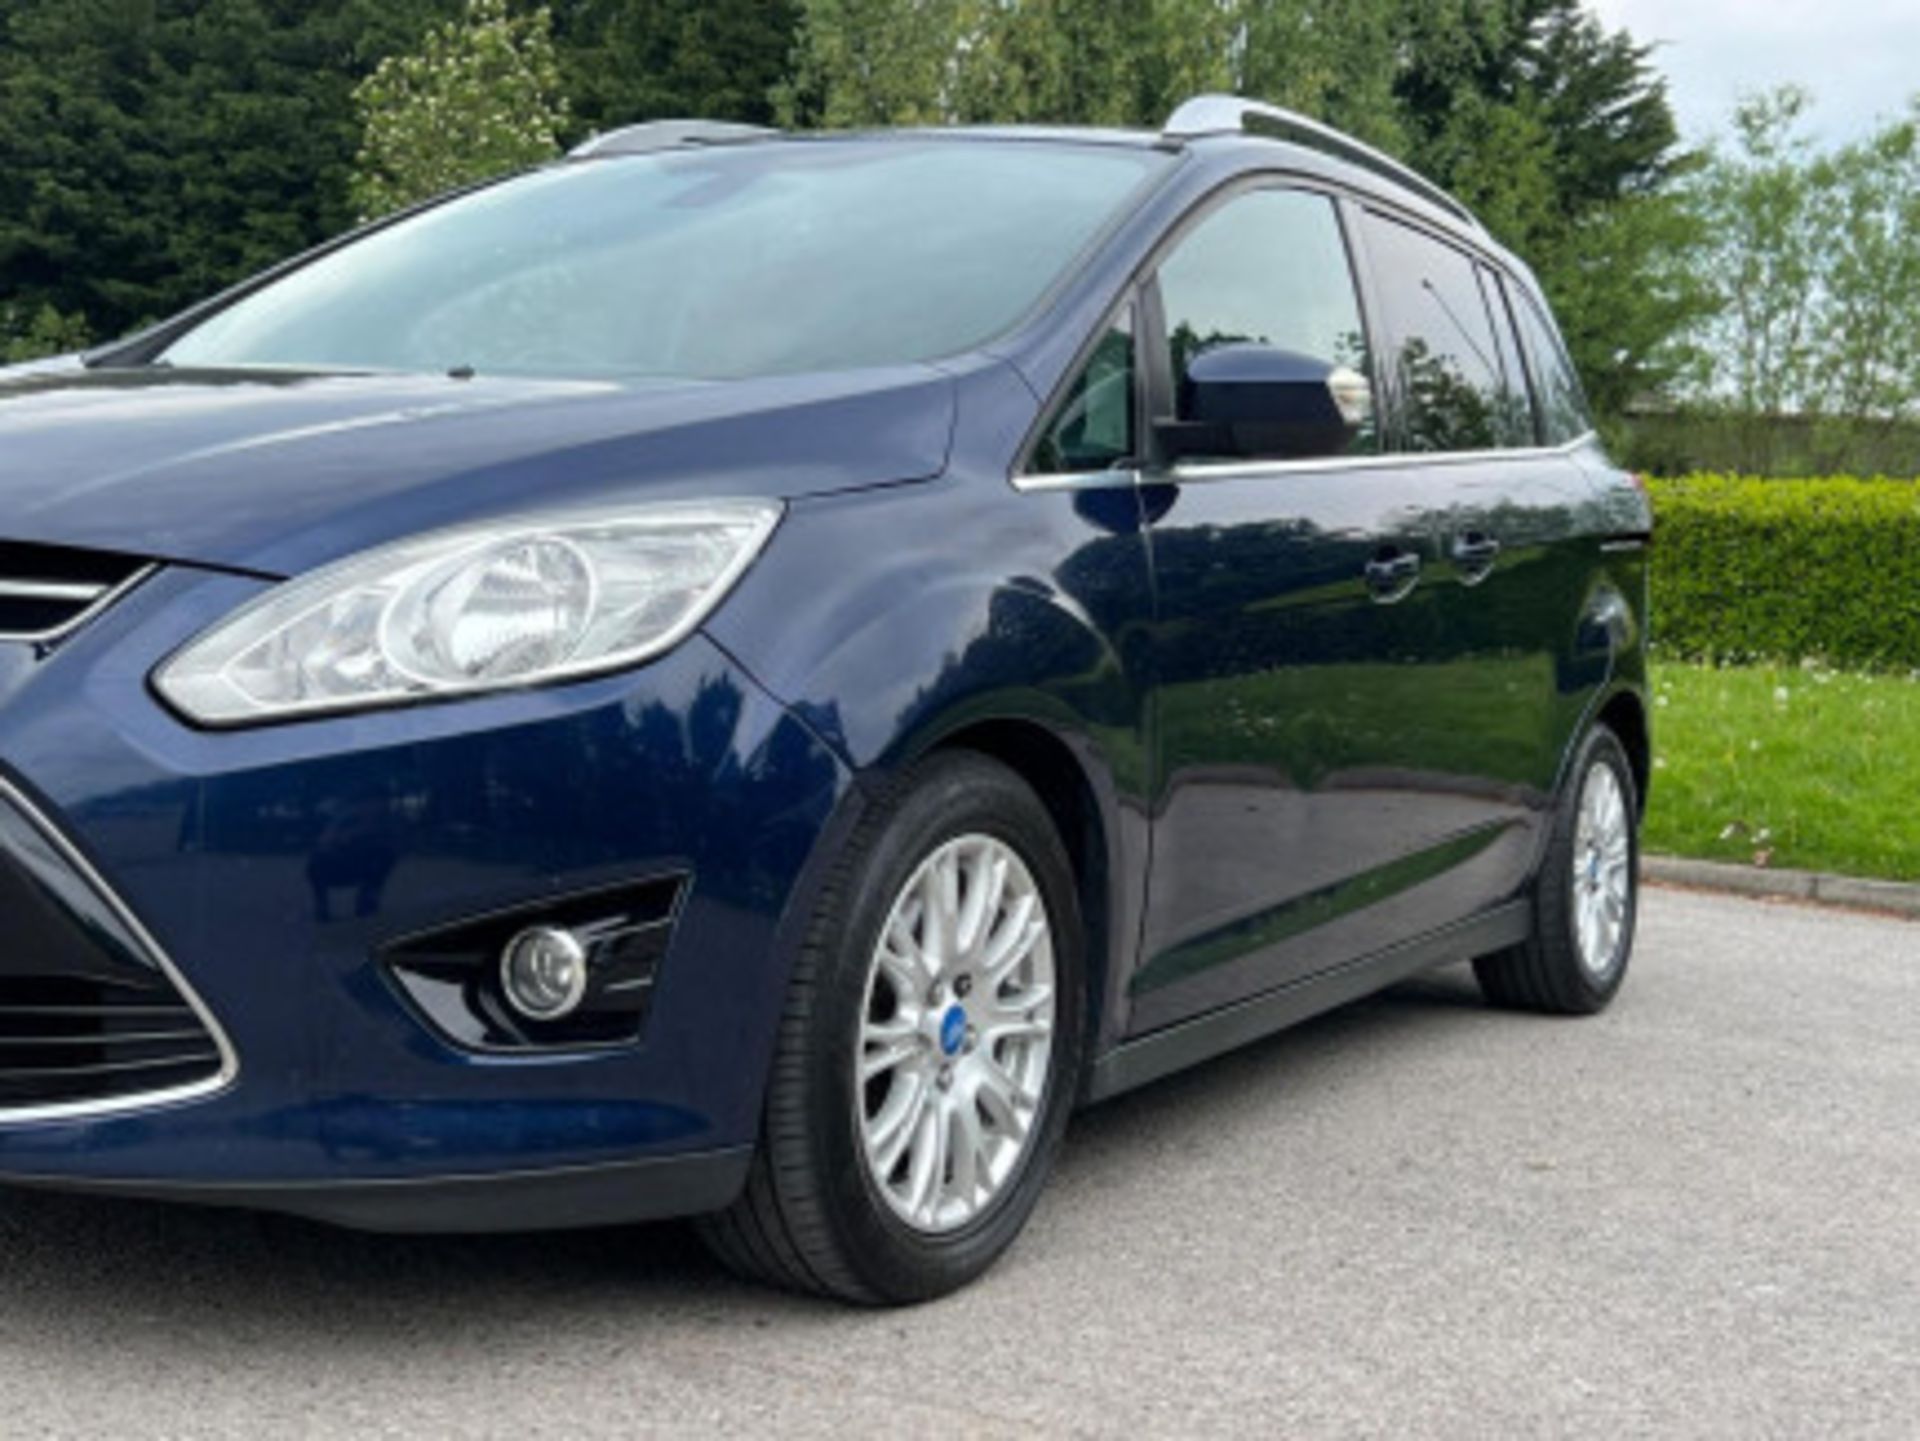 STYLISH AND SPACIOUS 2011 FORD GRAND C-MAX 1.6 TDCI >>--NO VAT ON HAMMER--<< - Image 58 of 136